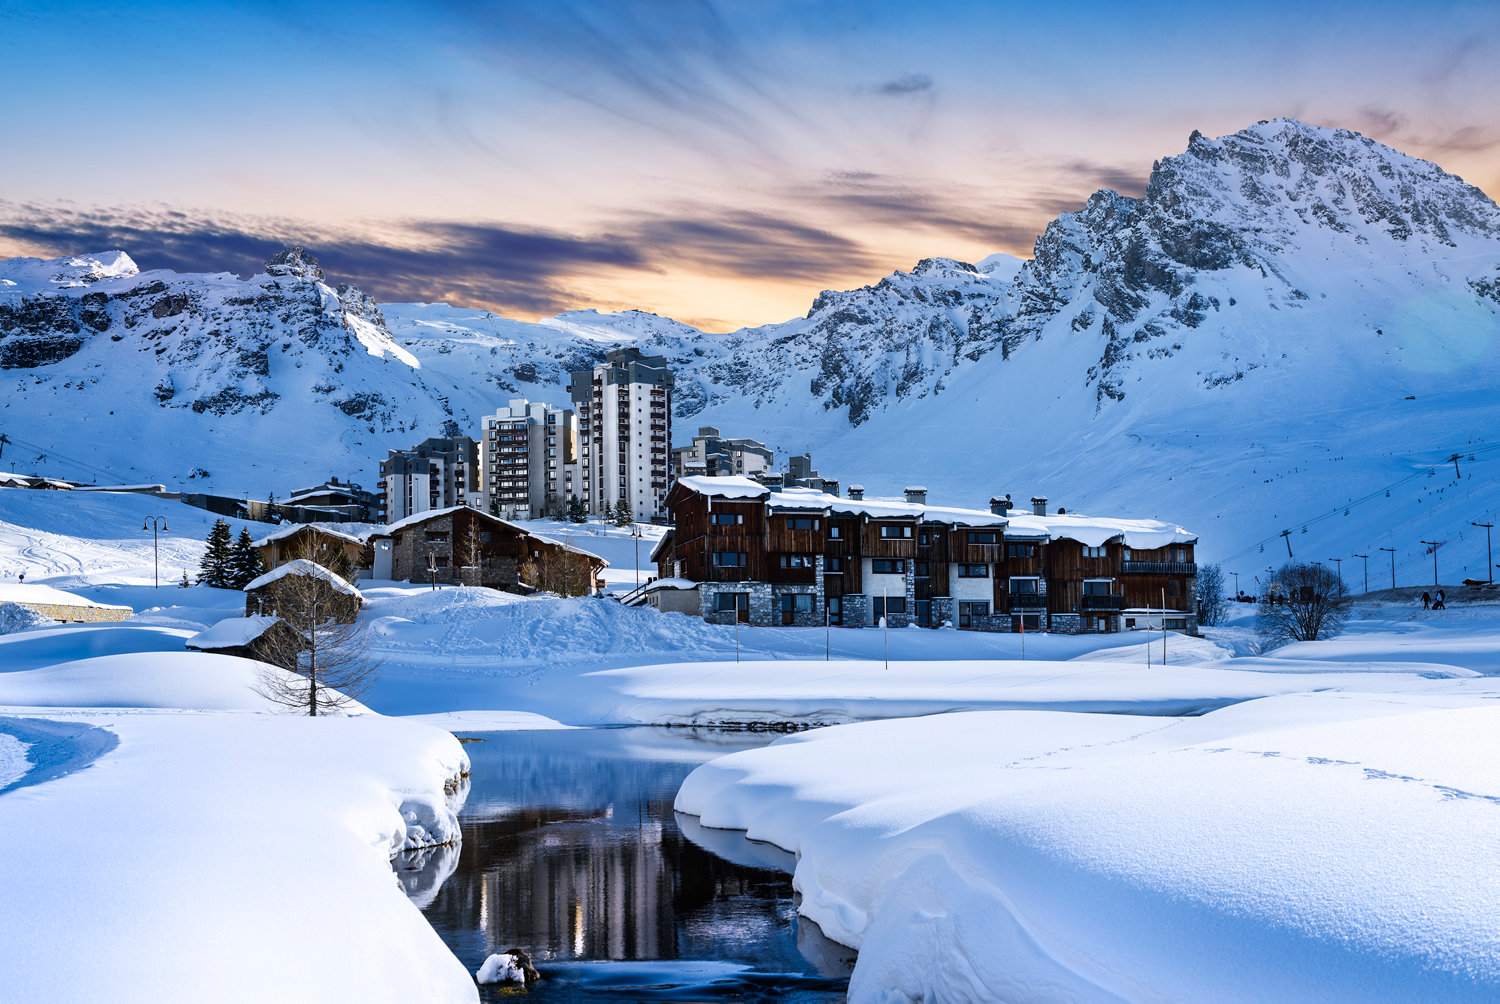 Evening landscape and Club Med ski resort in French Alps,Tignes, France